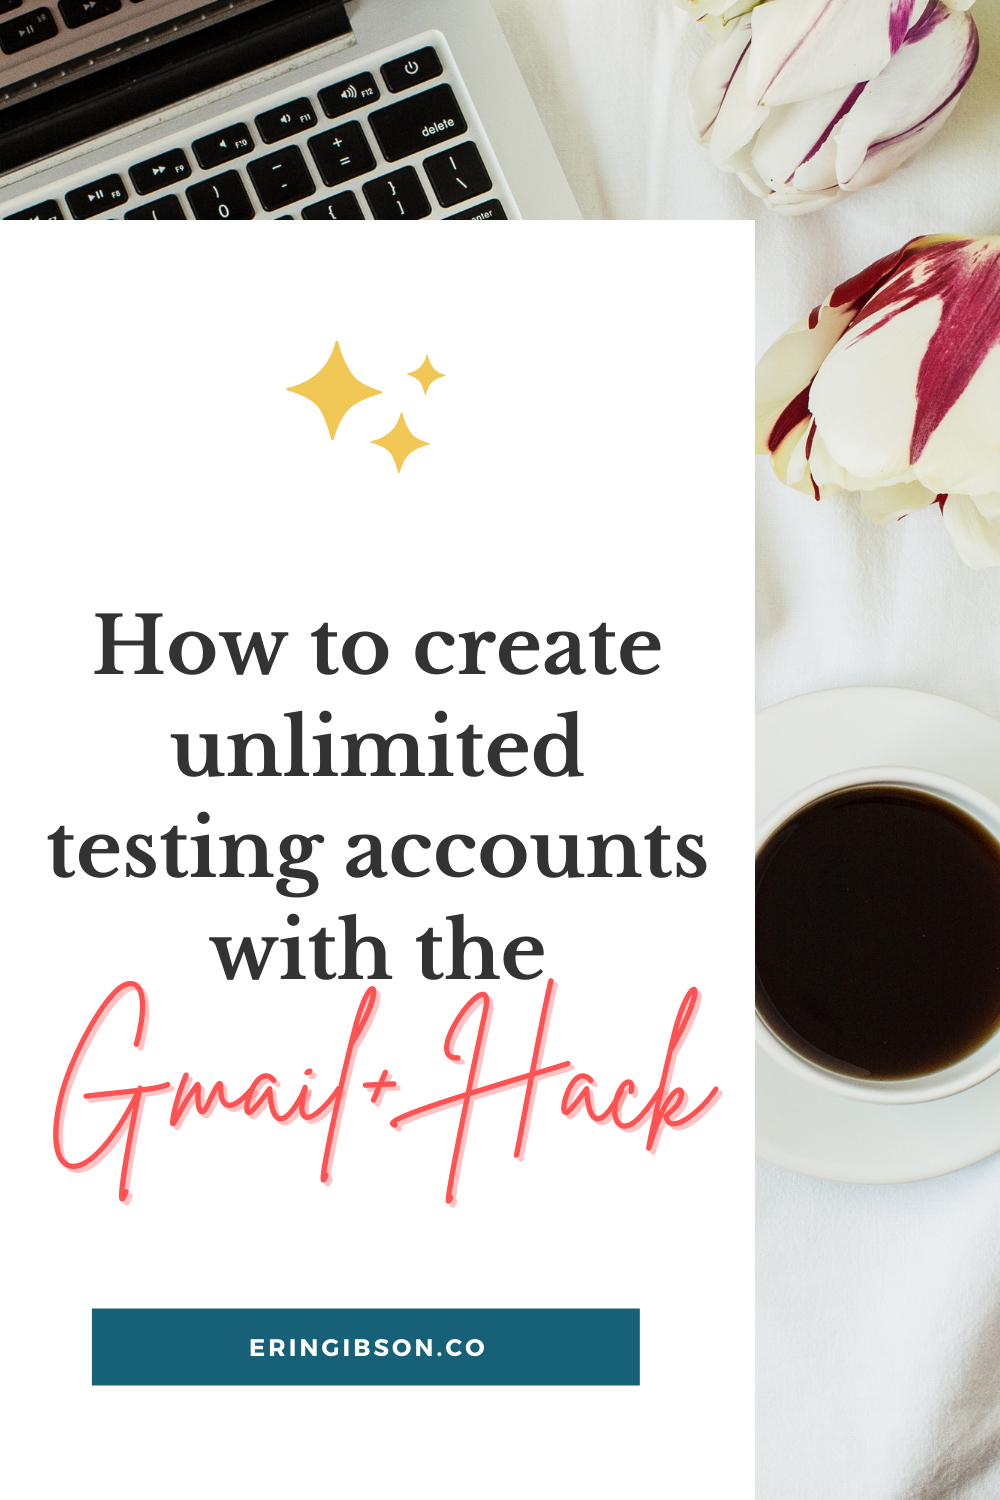 How to create unlimited email addresses with the Gmail+ hack